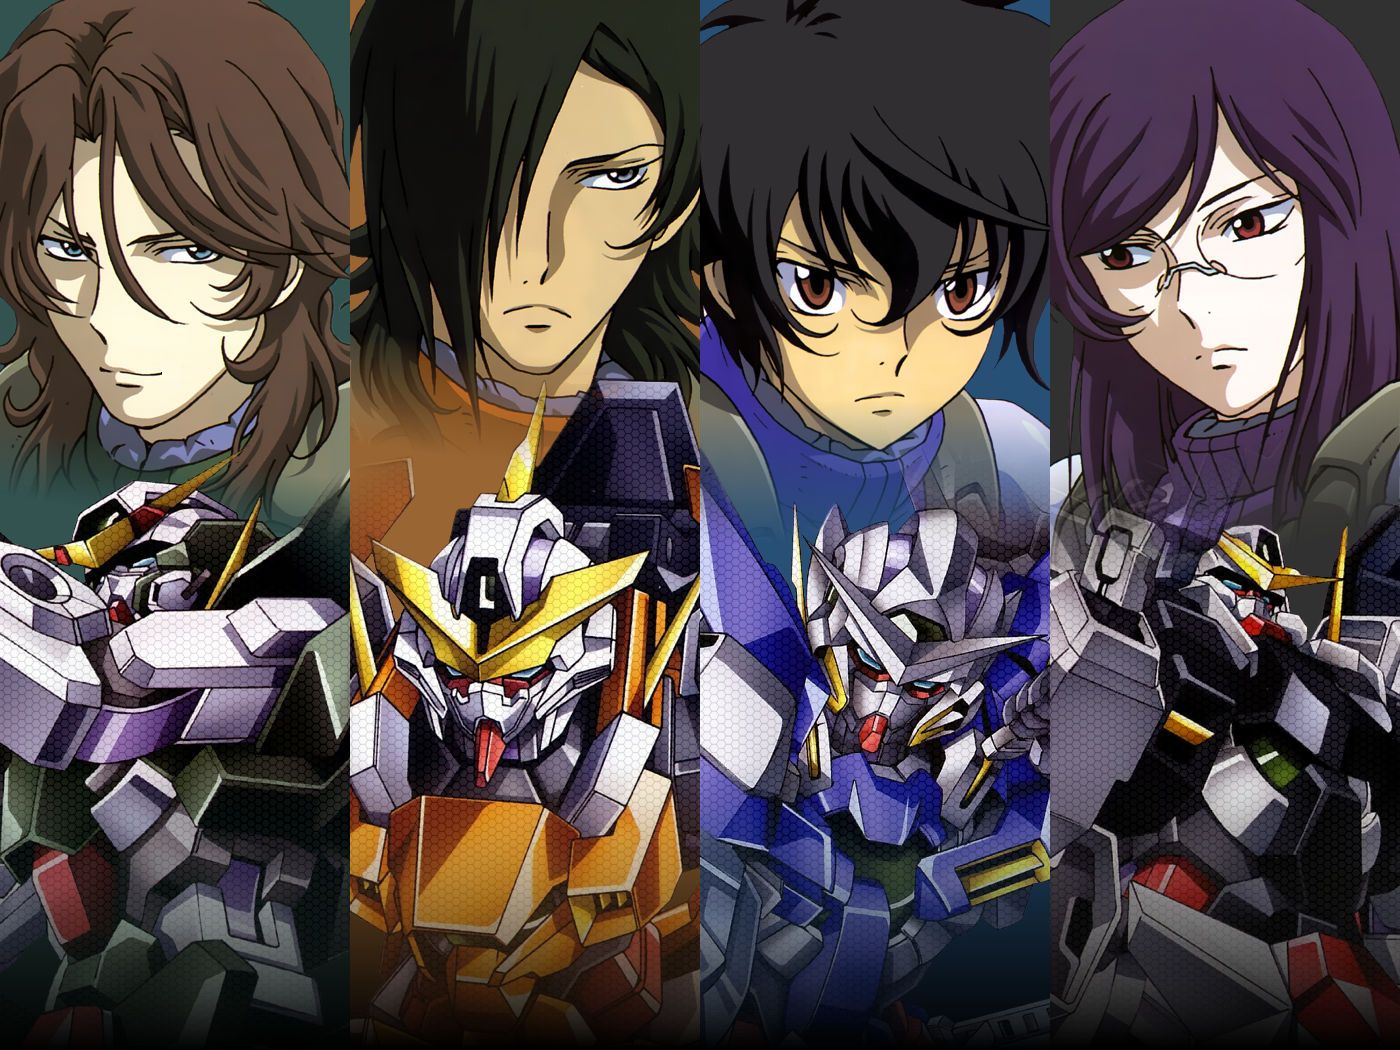 You are currently viewing Channel Surfing: Mobile Suit Gundam 00 S2